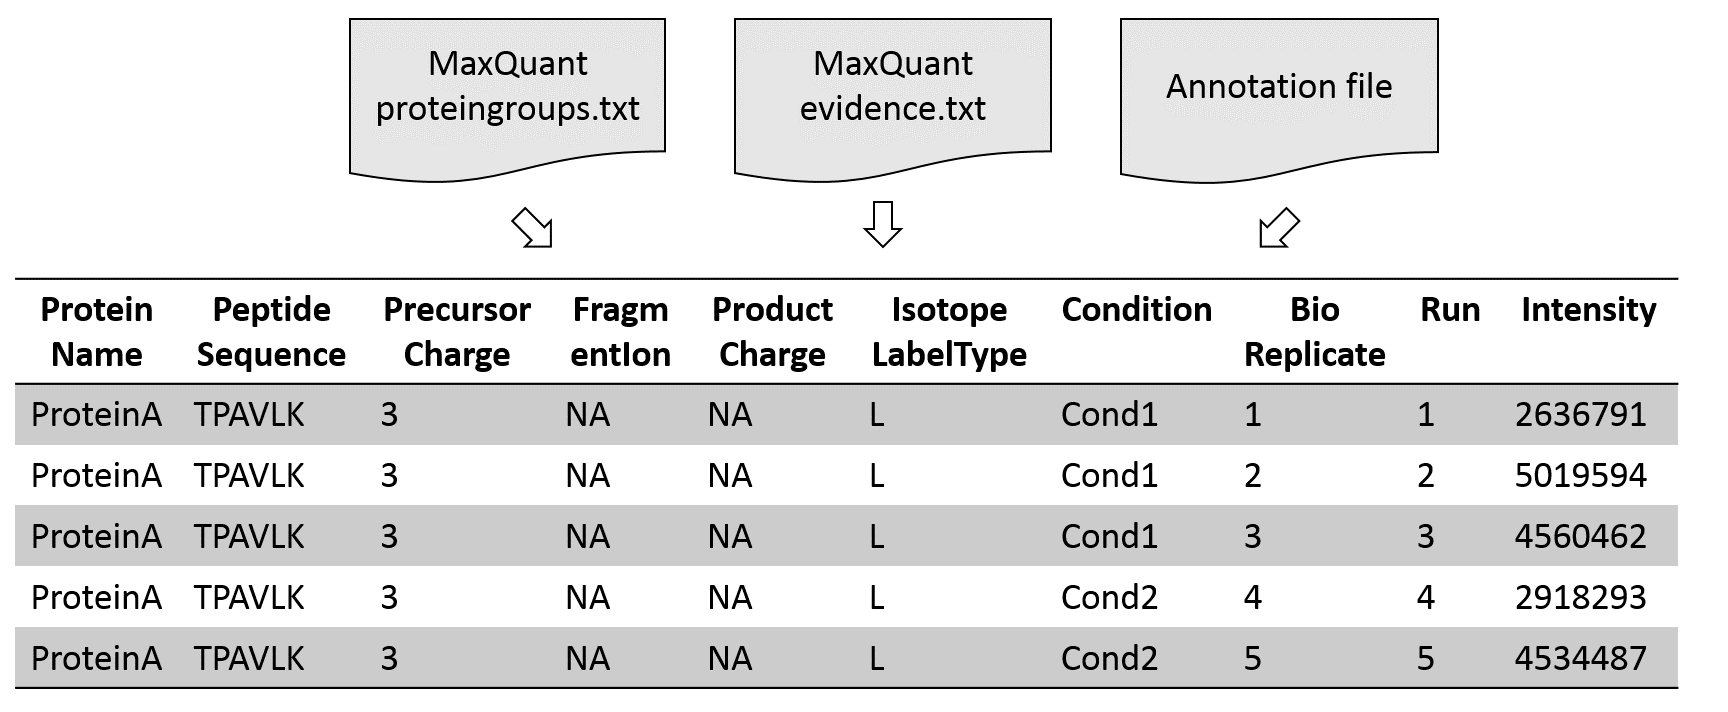 three files, max quant protein groups.txt, evidence.txt, and annotation file go into a large table with proteinA and several different run intensities.